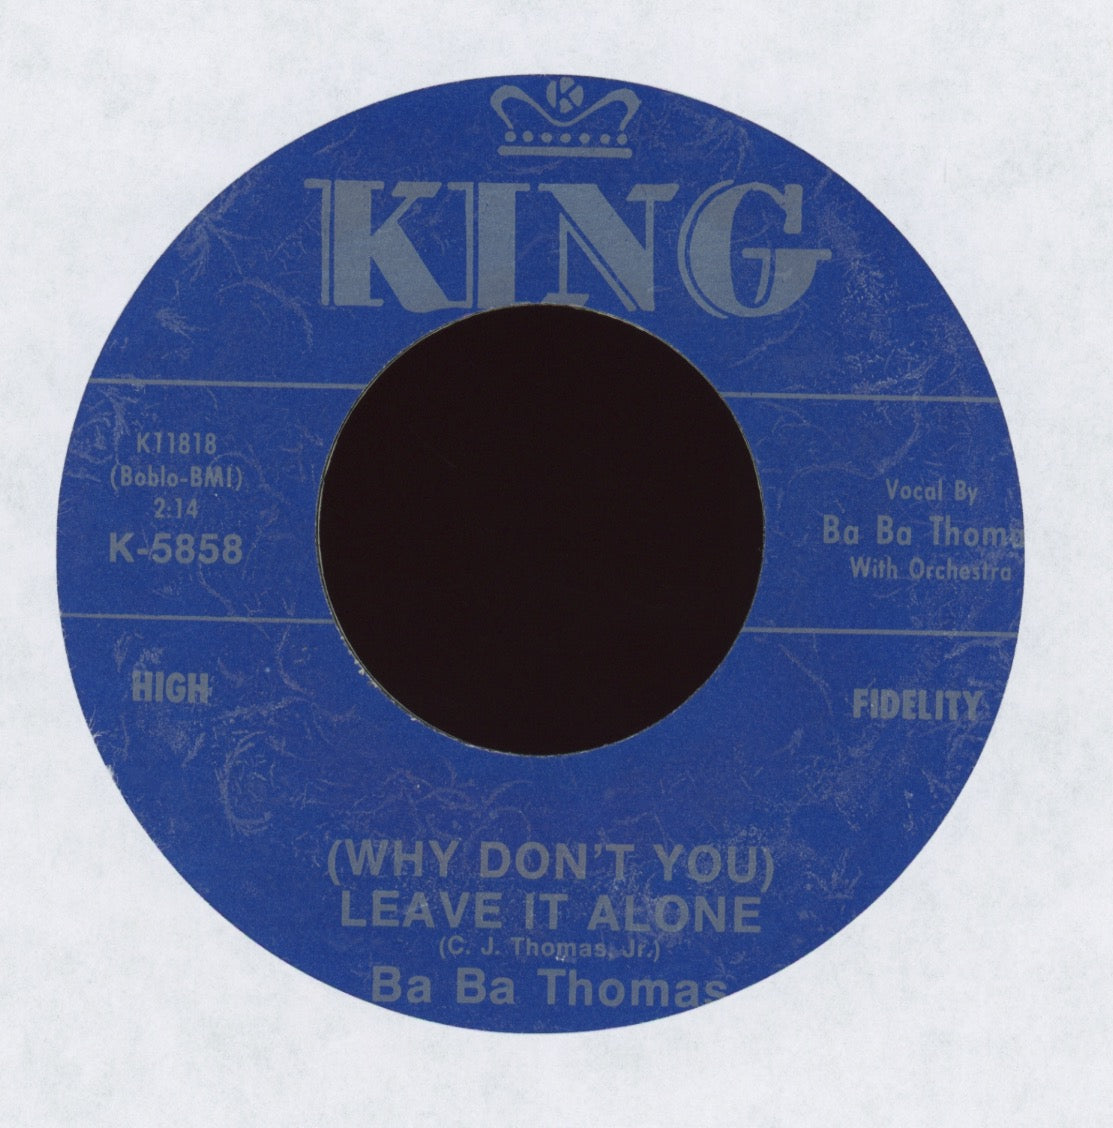 Ba Ba Thomas - (Why Don't You) Leave It Alone on King Second Pressing